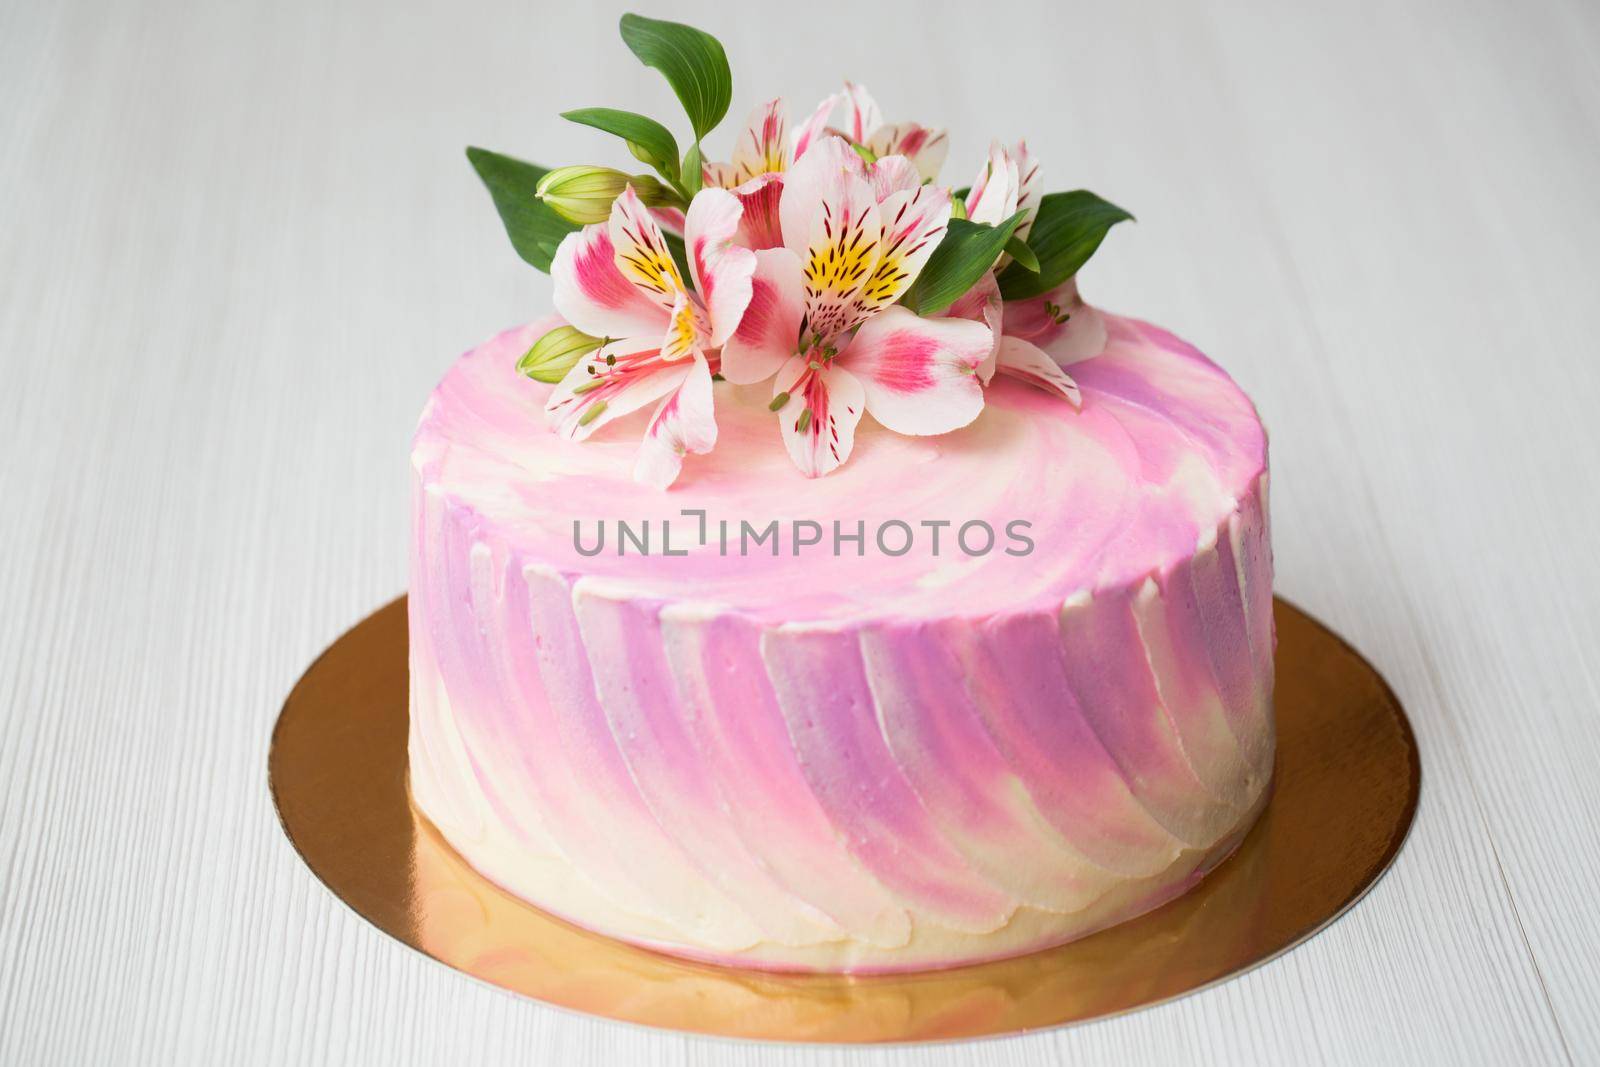 A cake with pink chocolate decor and flowers by StudioPeace